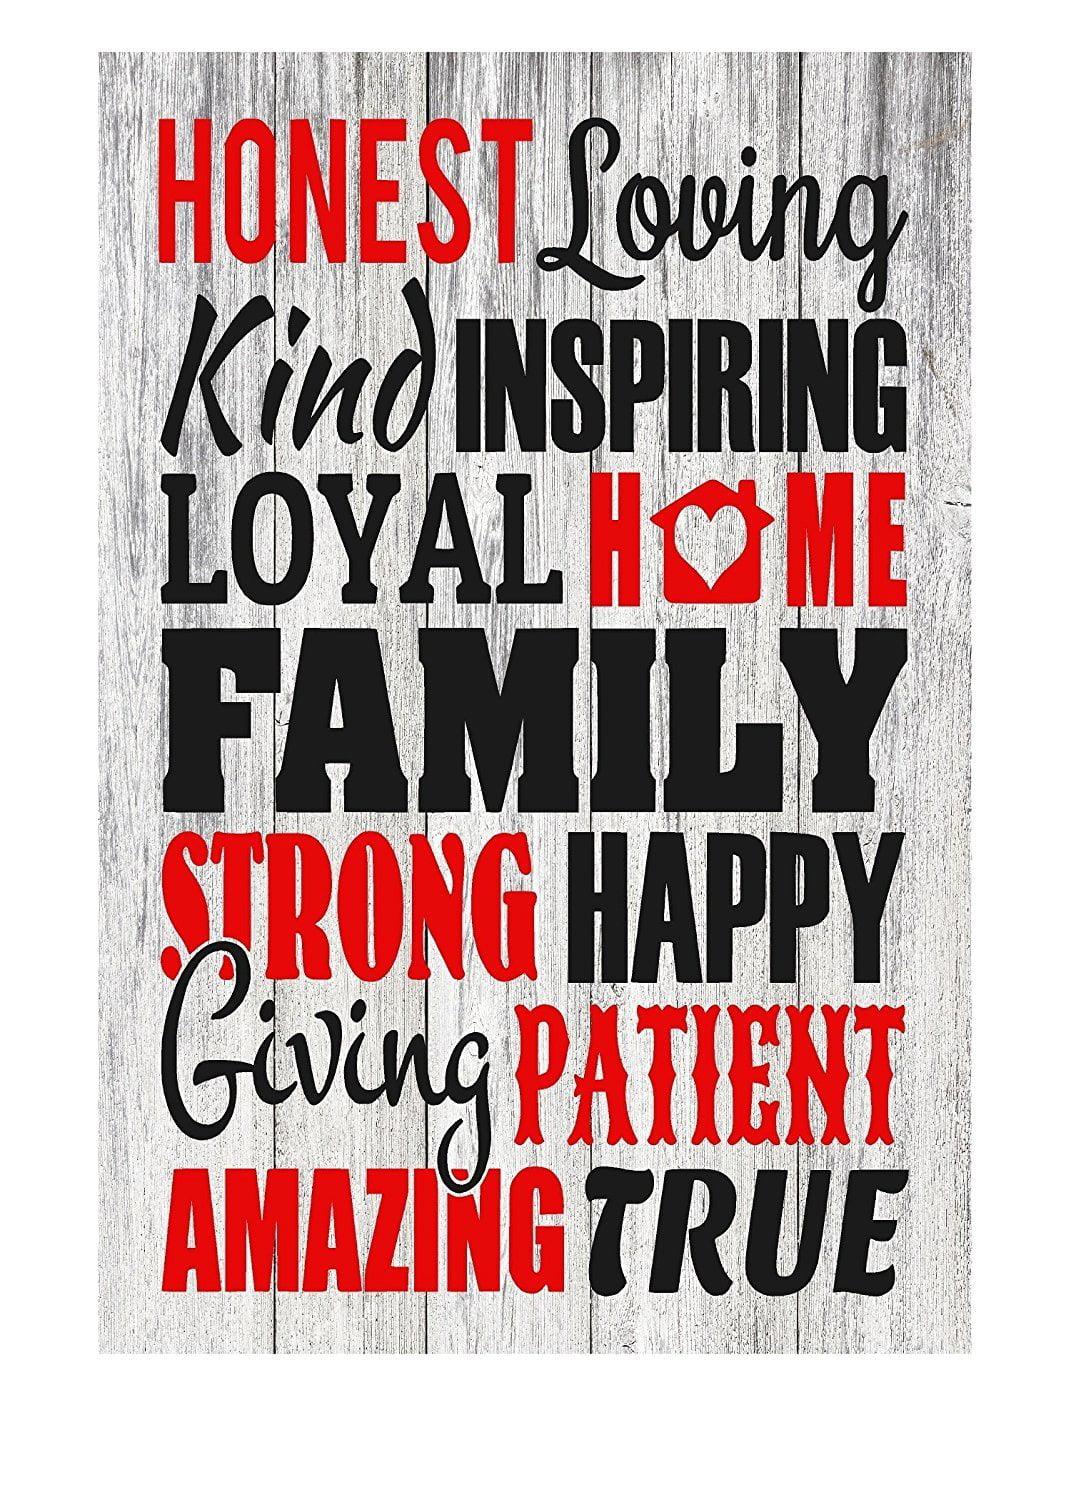 Honest Loving Kind Inspiring Quote Rustic Metal Sign Home Decor Red & Black  - 12 x 8 